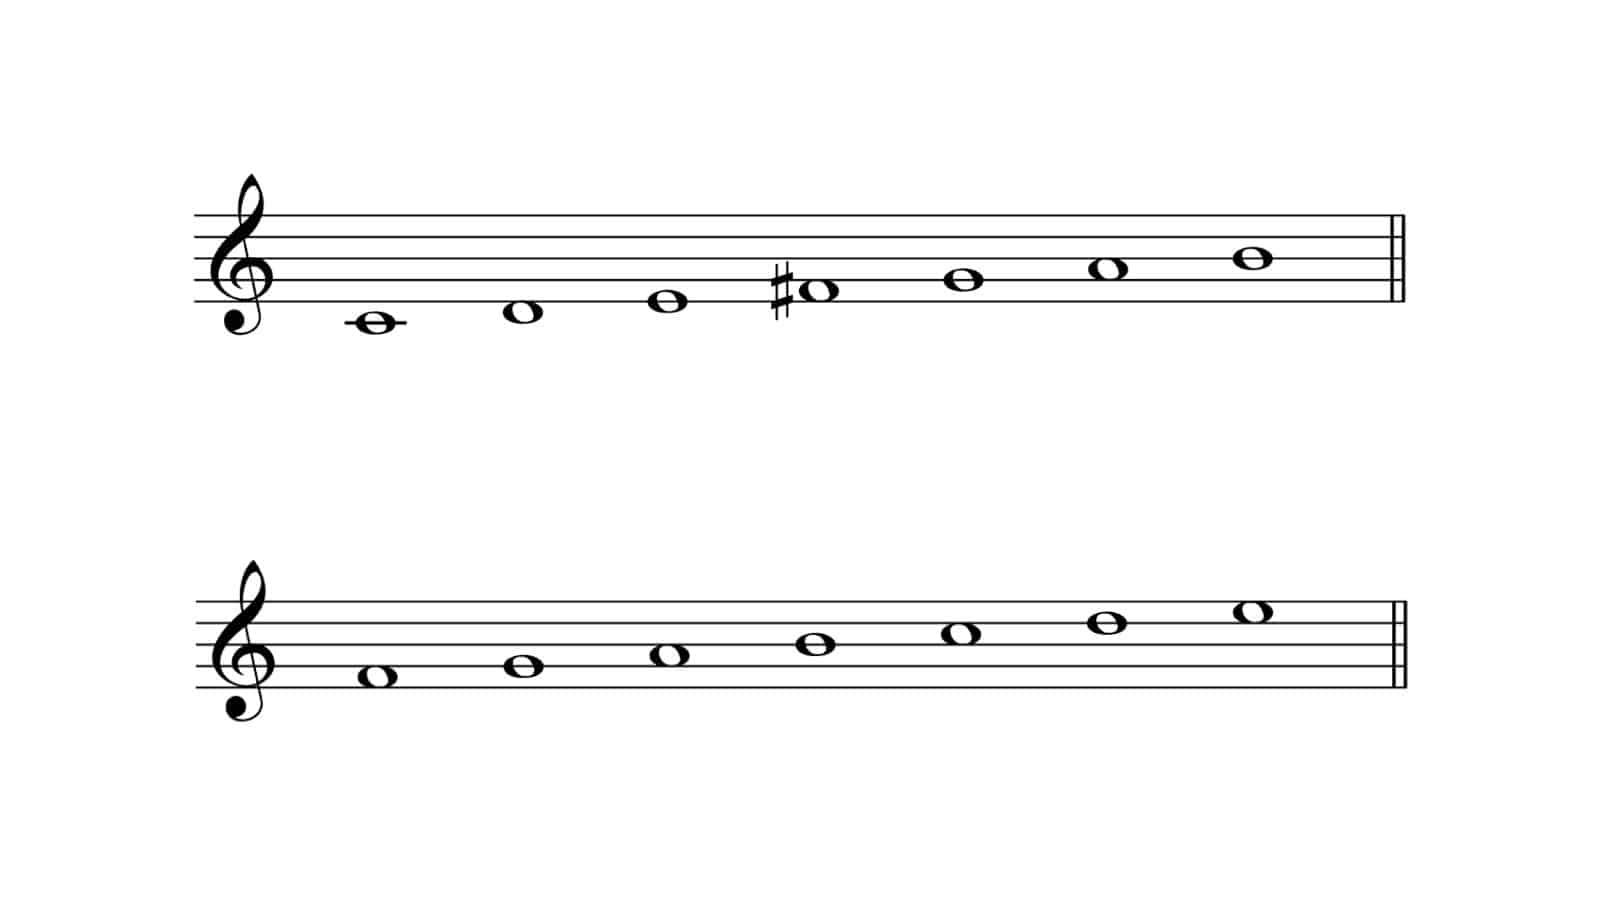 Lydian mode on C (top) and F (bottom)